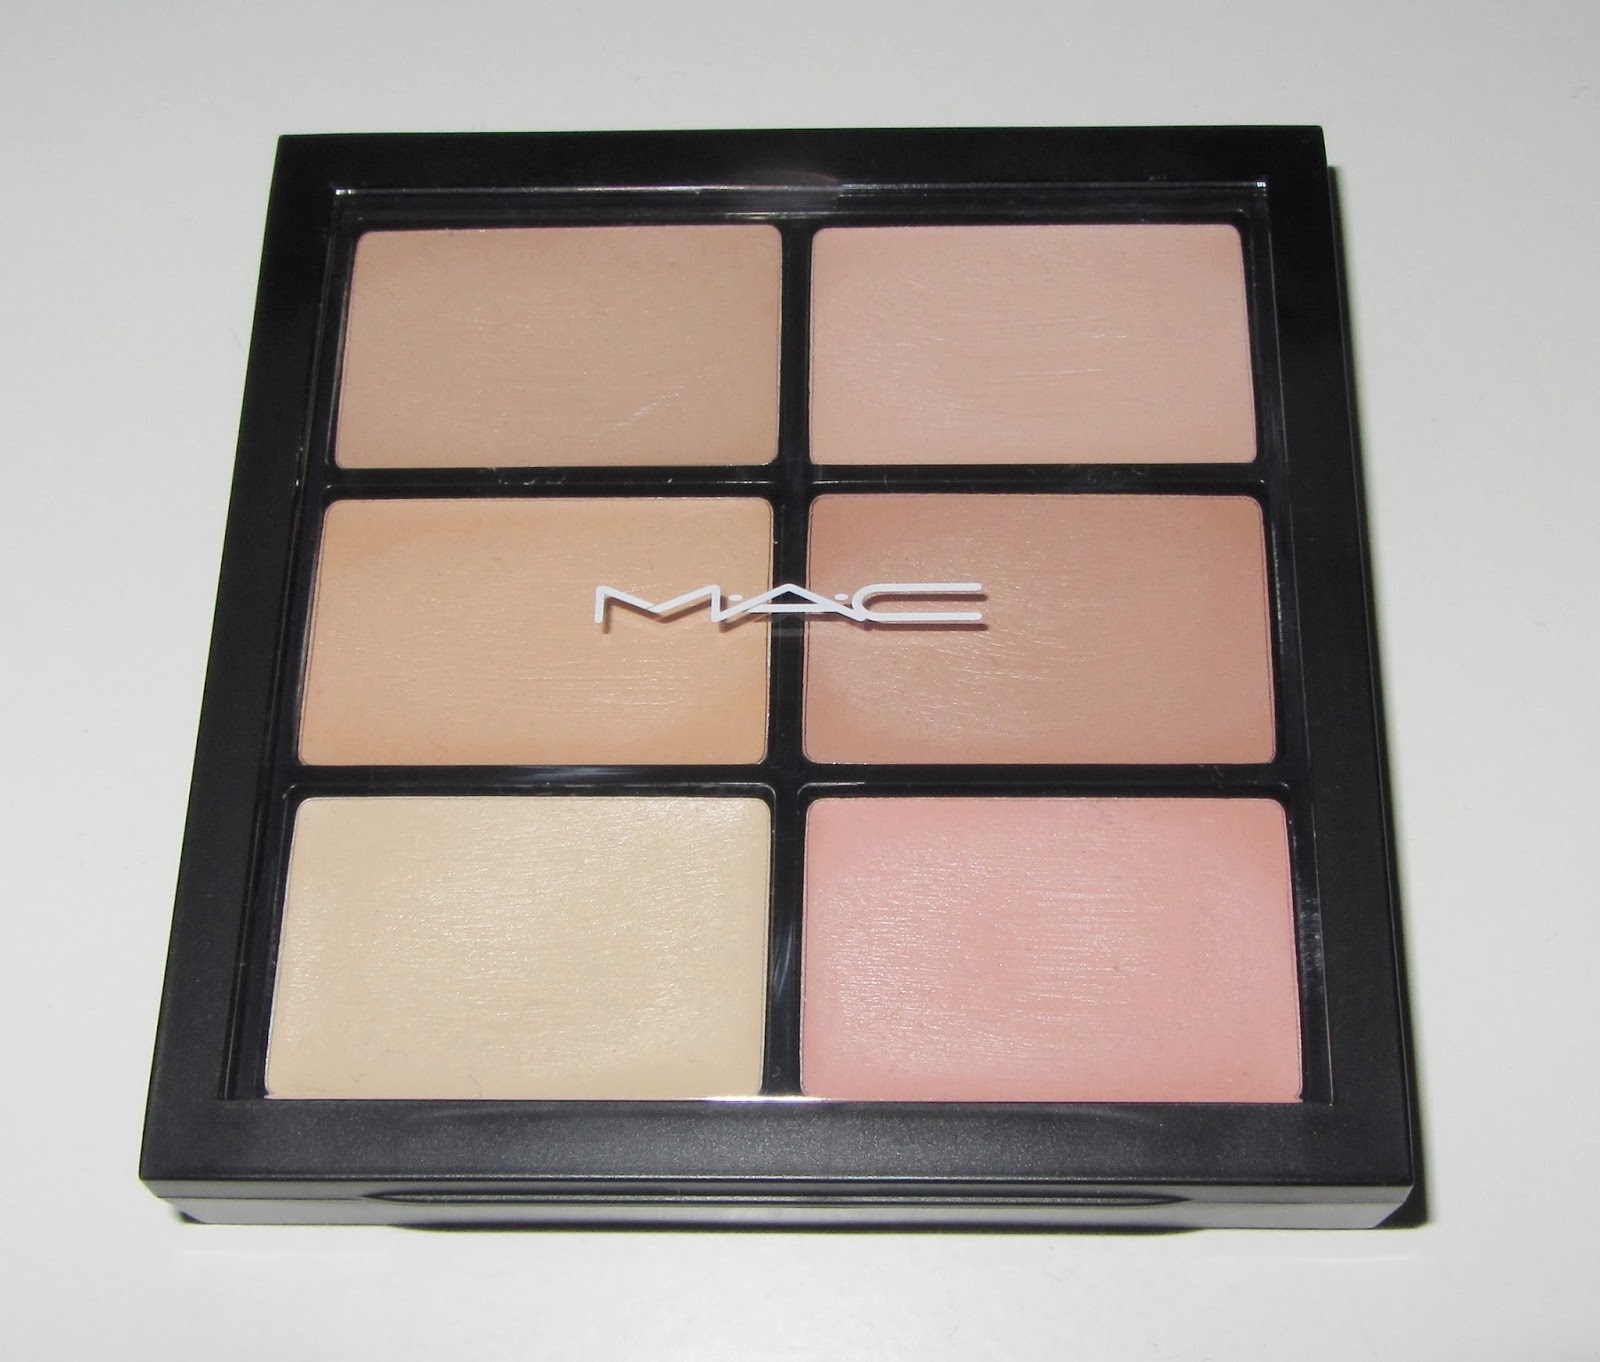 MAC Pro Conceal and Correct Palette in Light.